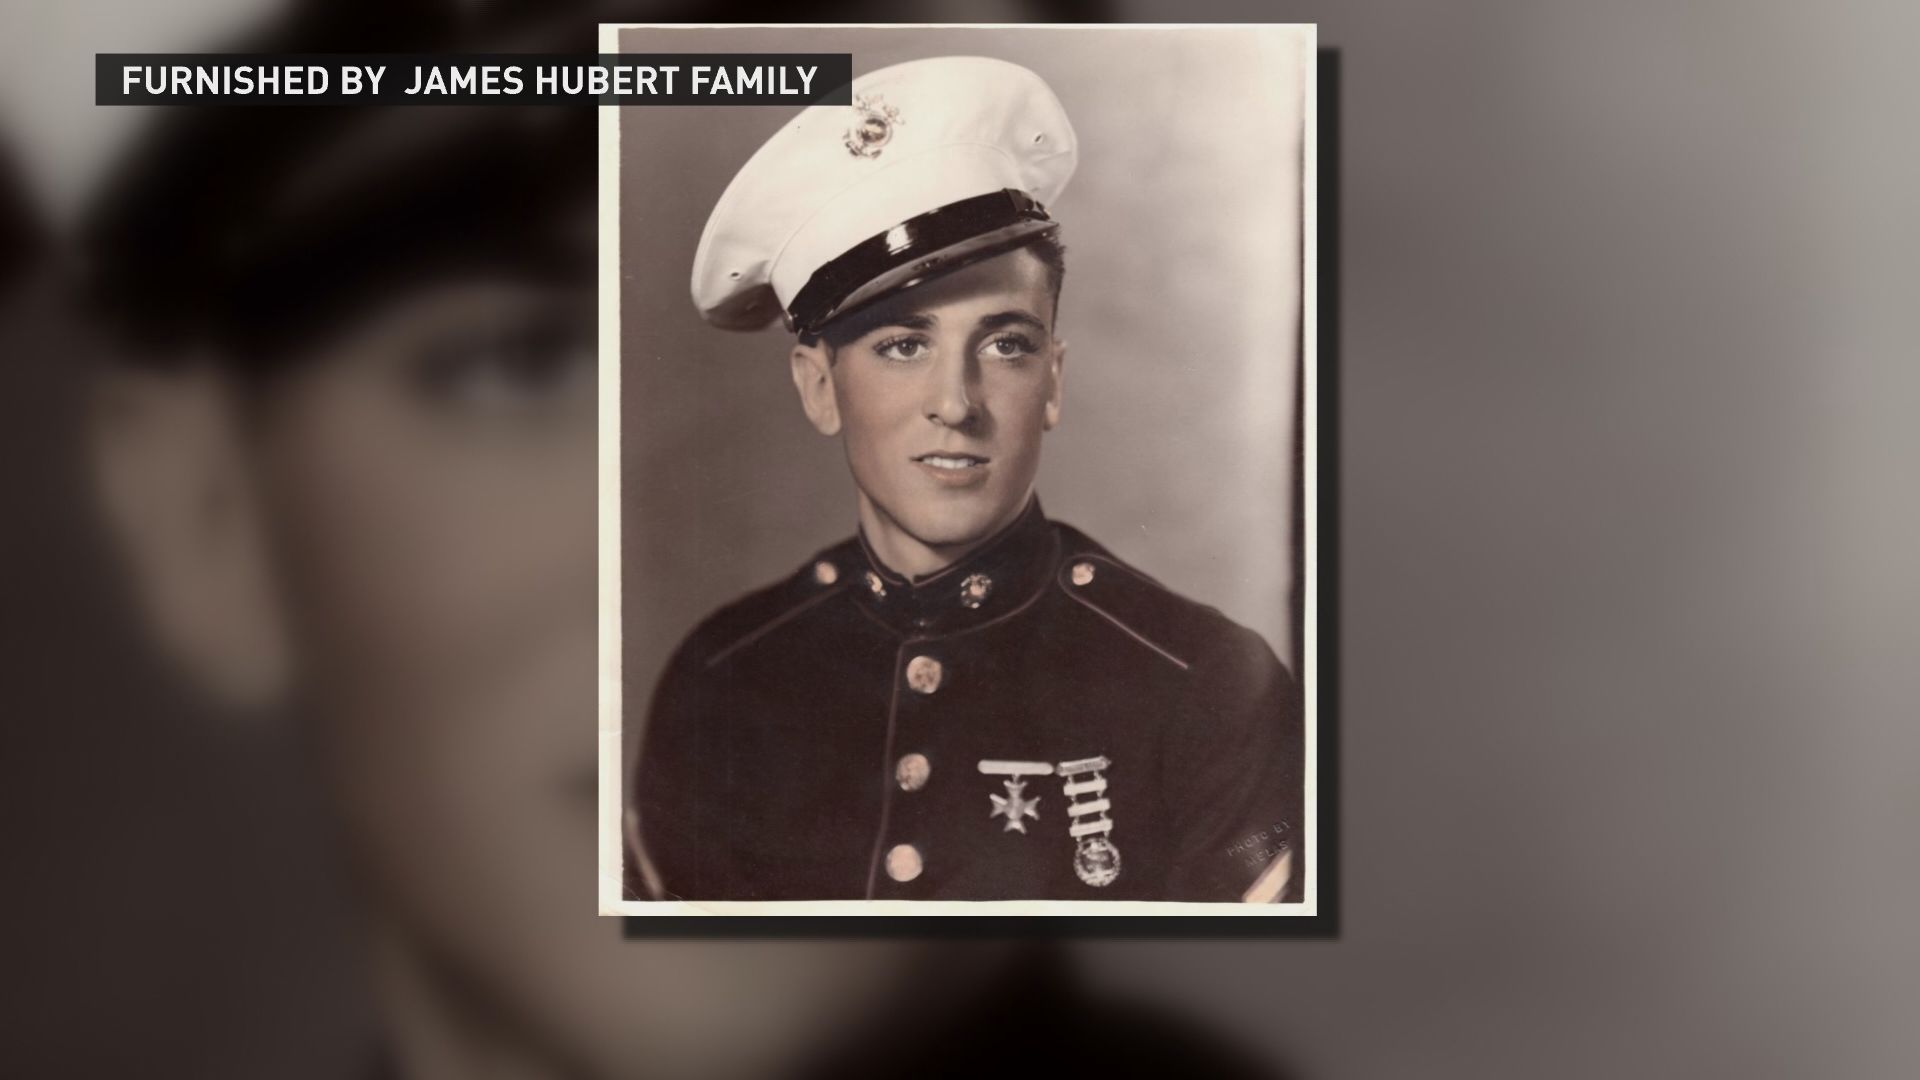 WWII marine returns to MN after 70 years